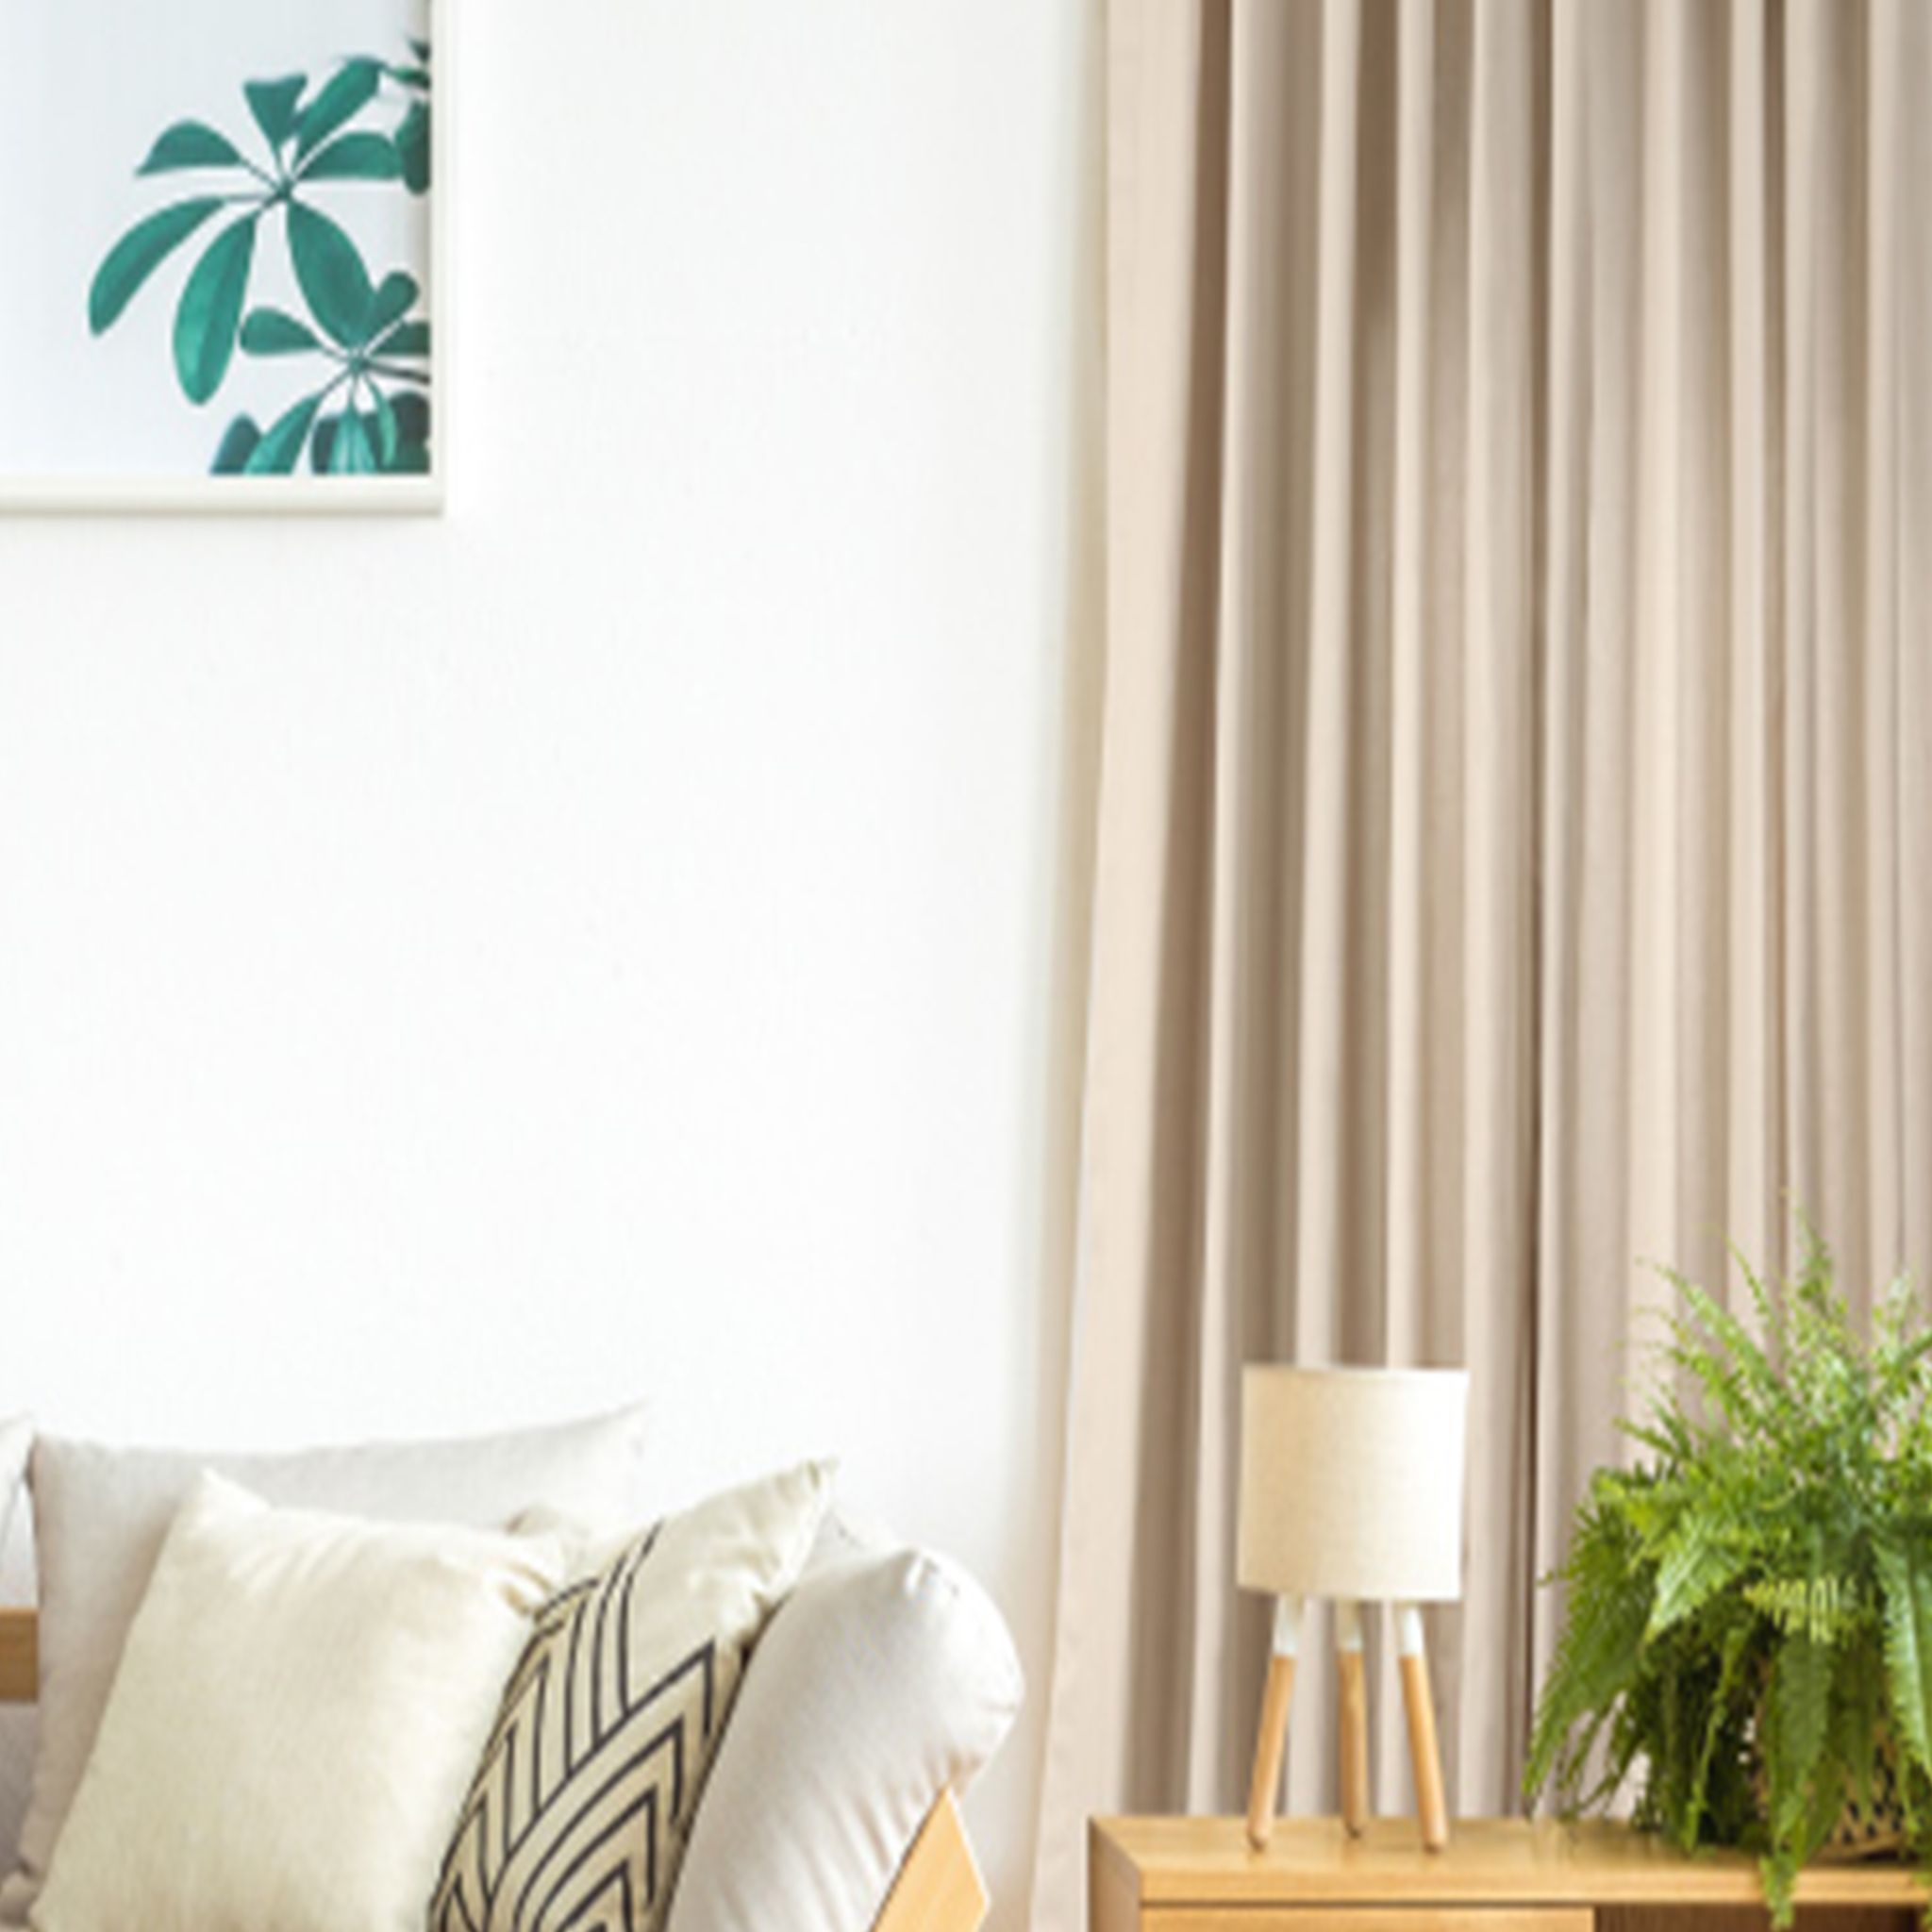 Our Solid Cotton Blackout Curtains Combine The Natural Look With Regard To Solid Cotton Curtain Panels (View 21 of 30)